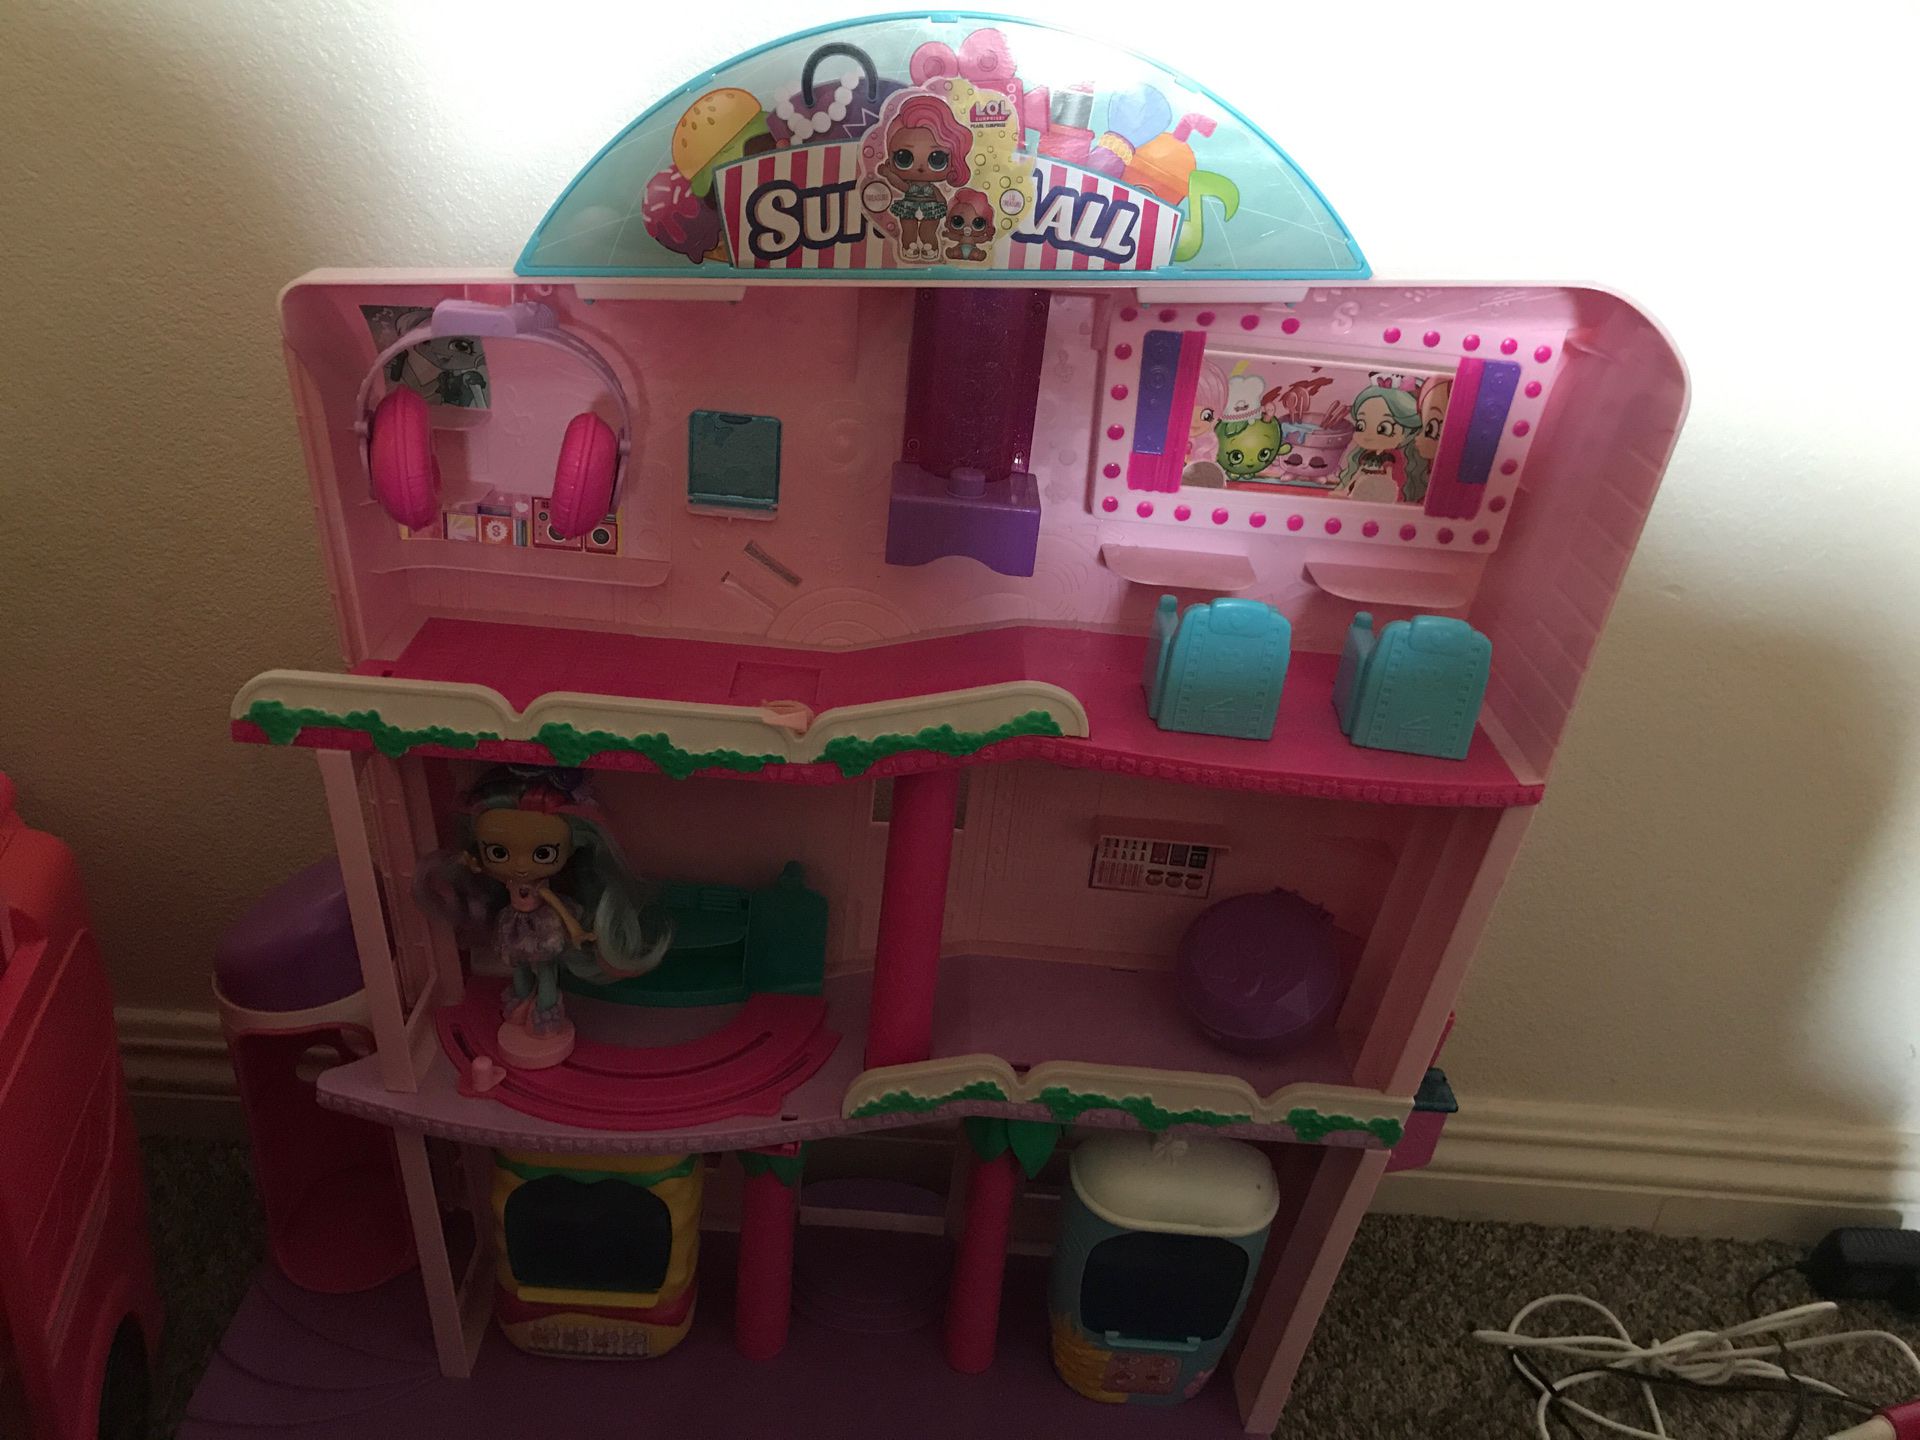 Shopkin mall comes with doll and shopkins